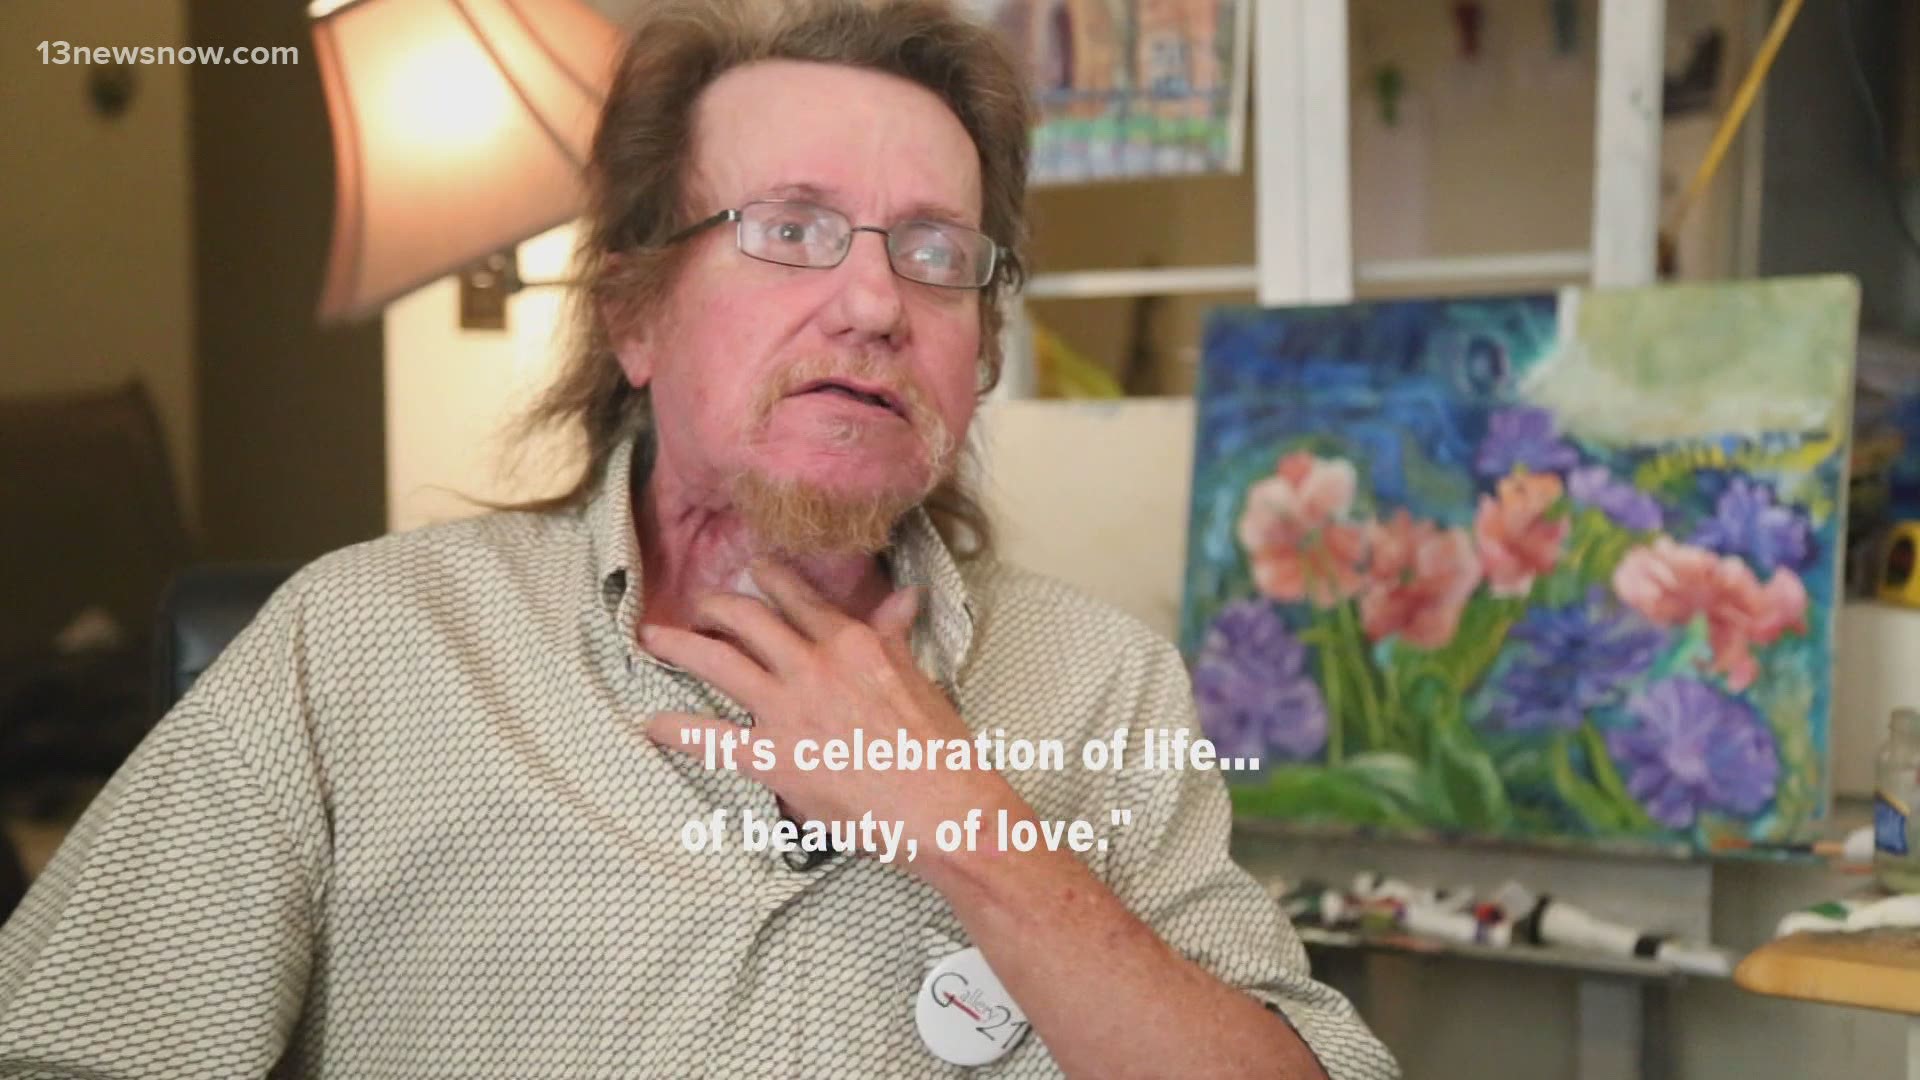 Greg Hammond, an impressionist painter in Portsmouth, is getting ready for his first major fine art gallery. He has a unique story of overcoming health challenges.